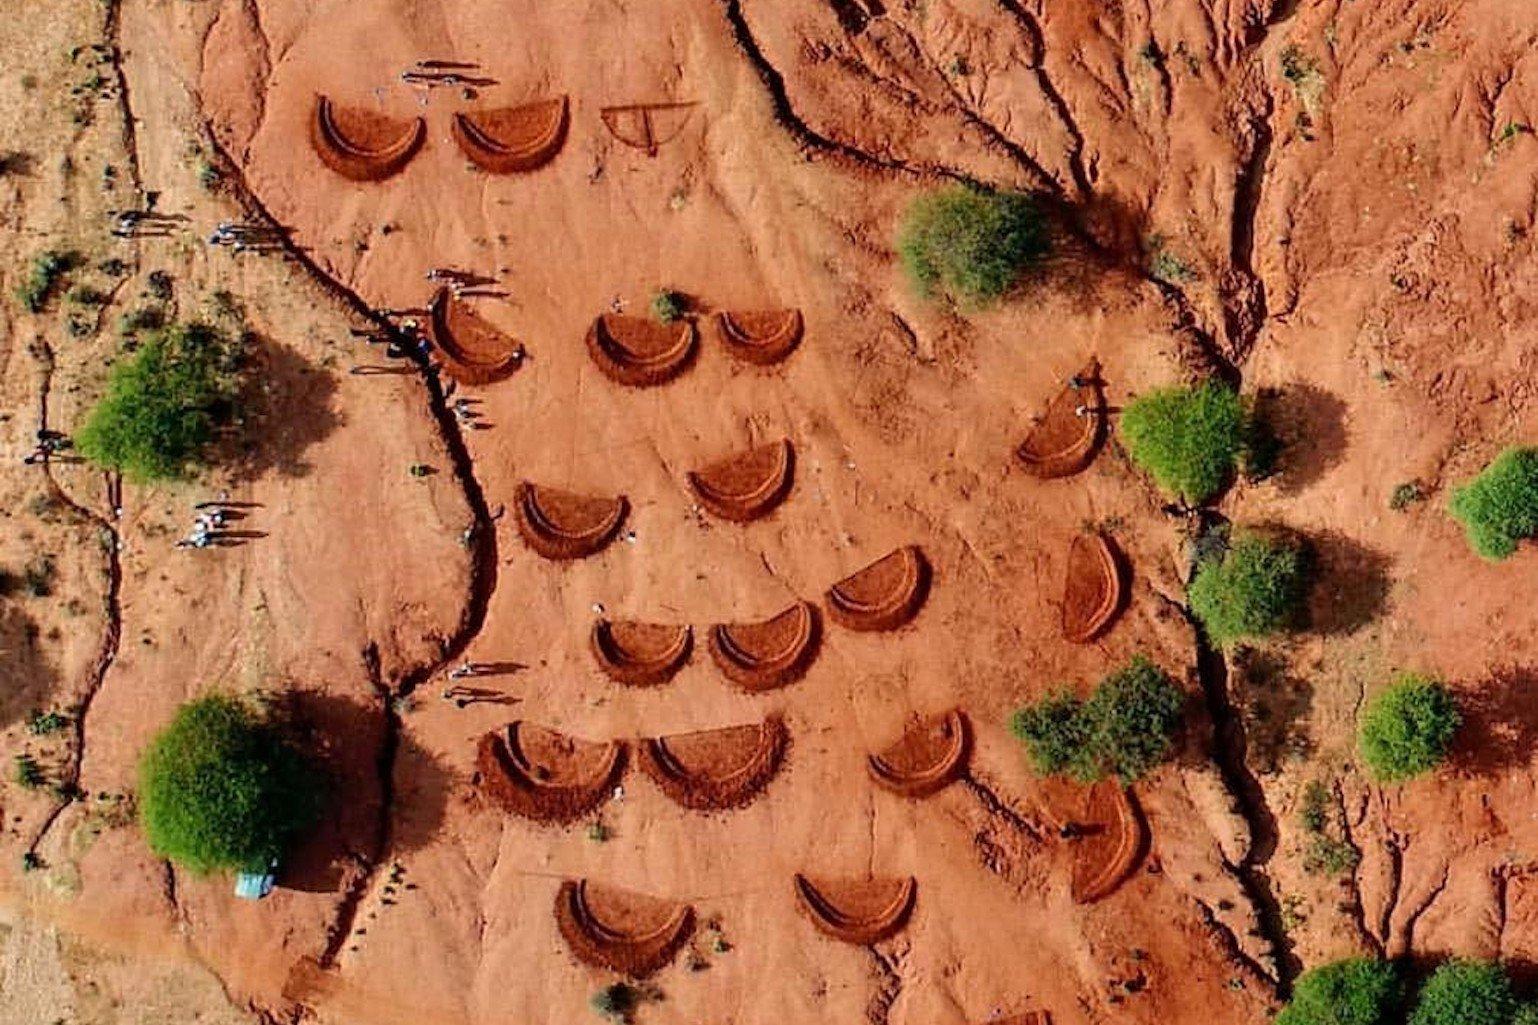 An ariel photo shows a series of large, shallow, half moon-shaped holes being dug into a plain of dry red soil. A few green trees are scattered across the plain, and a small group of people are clustered around a few of the holes.